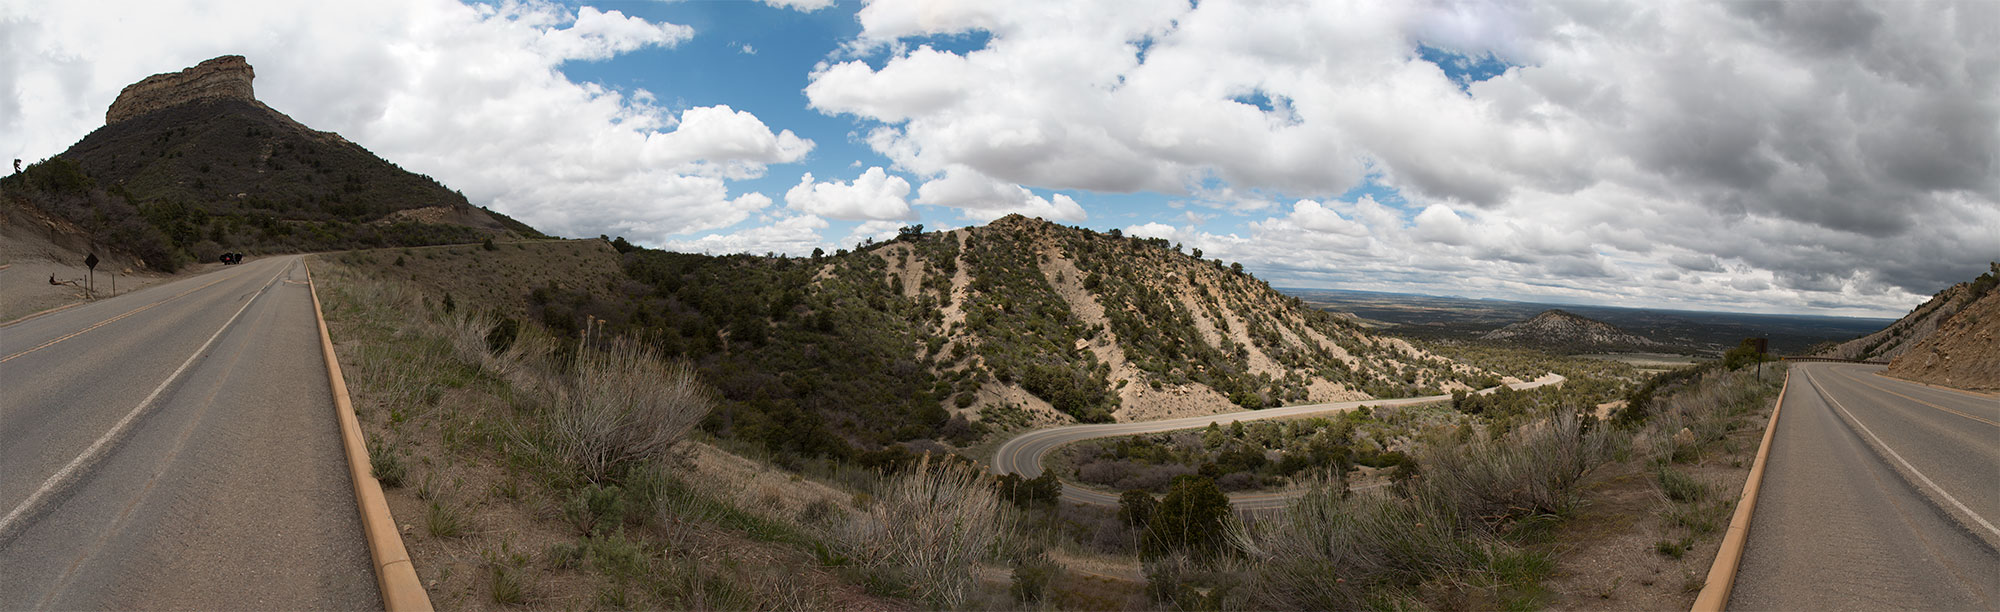 The road leading to the ruins at Mesa Verde National Park